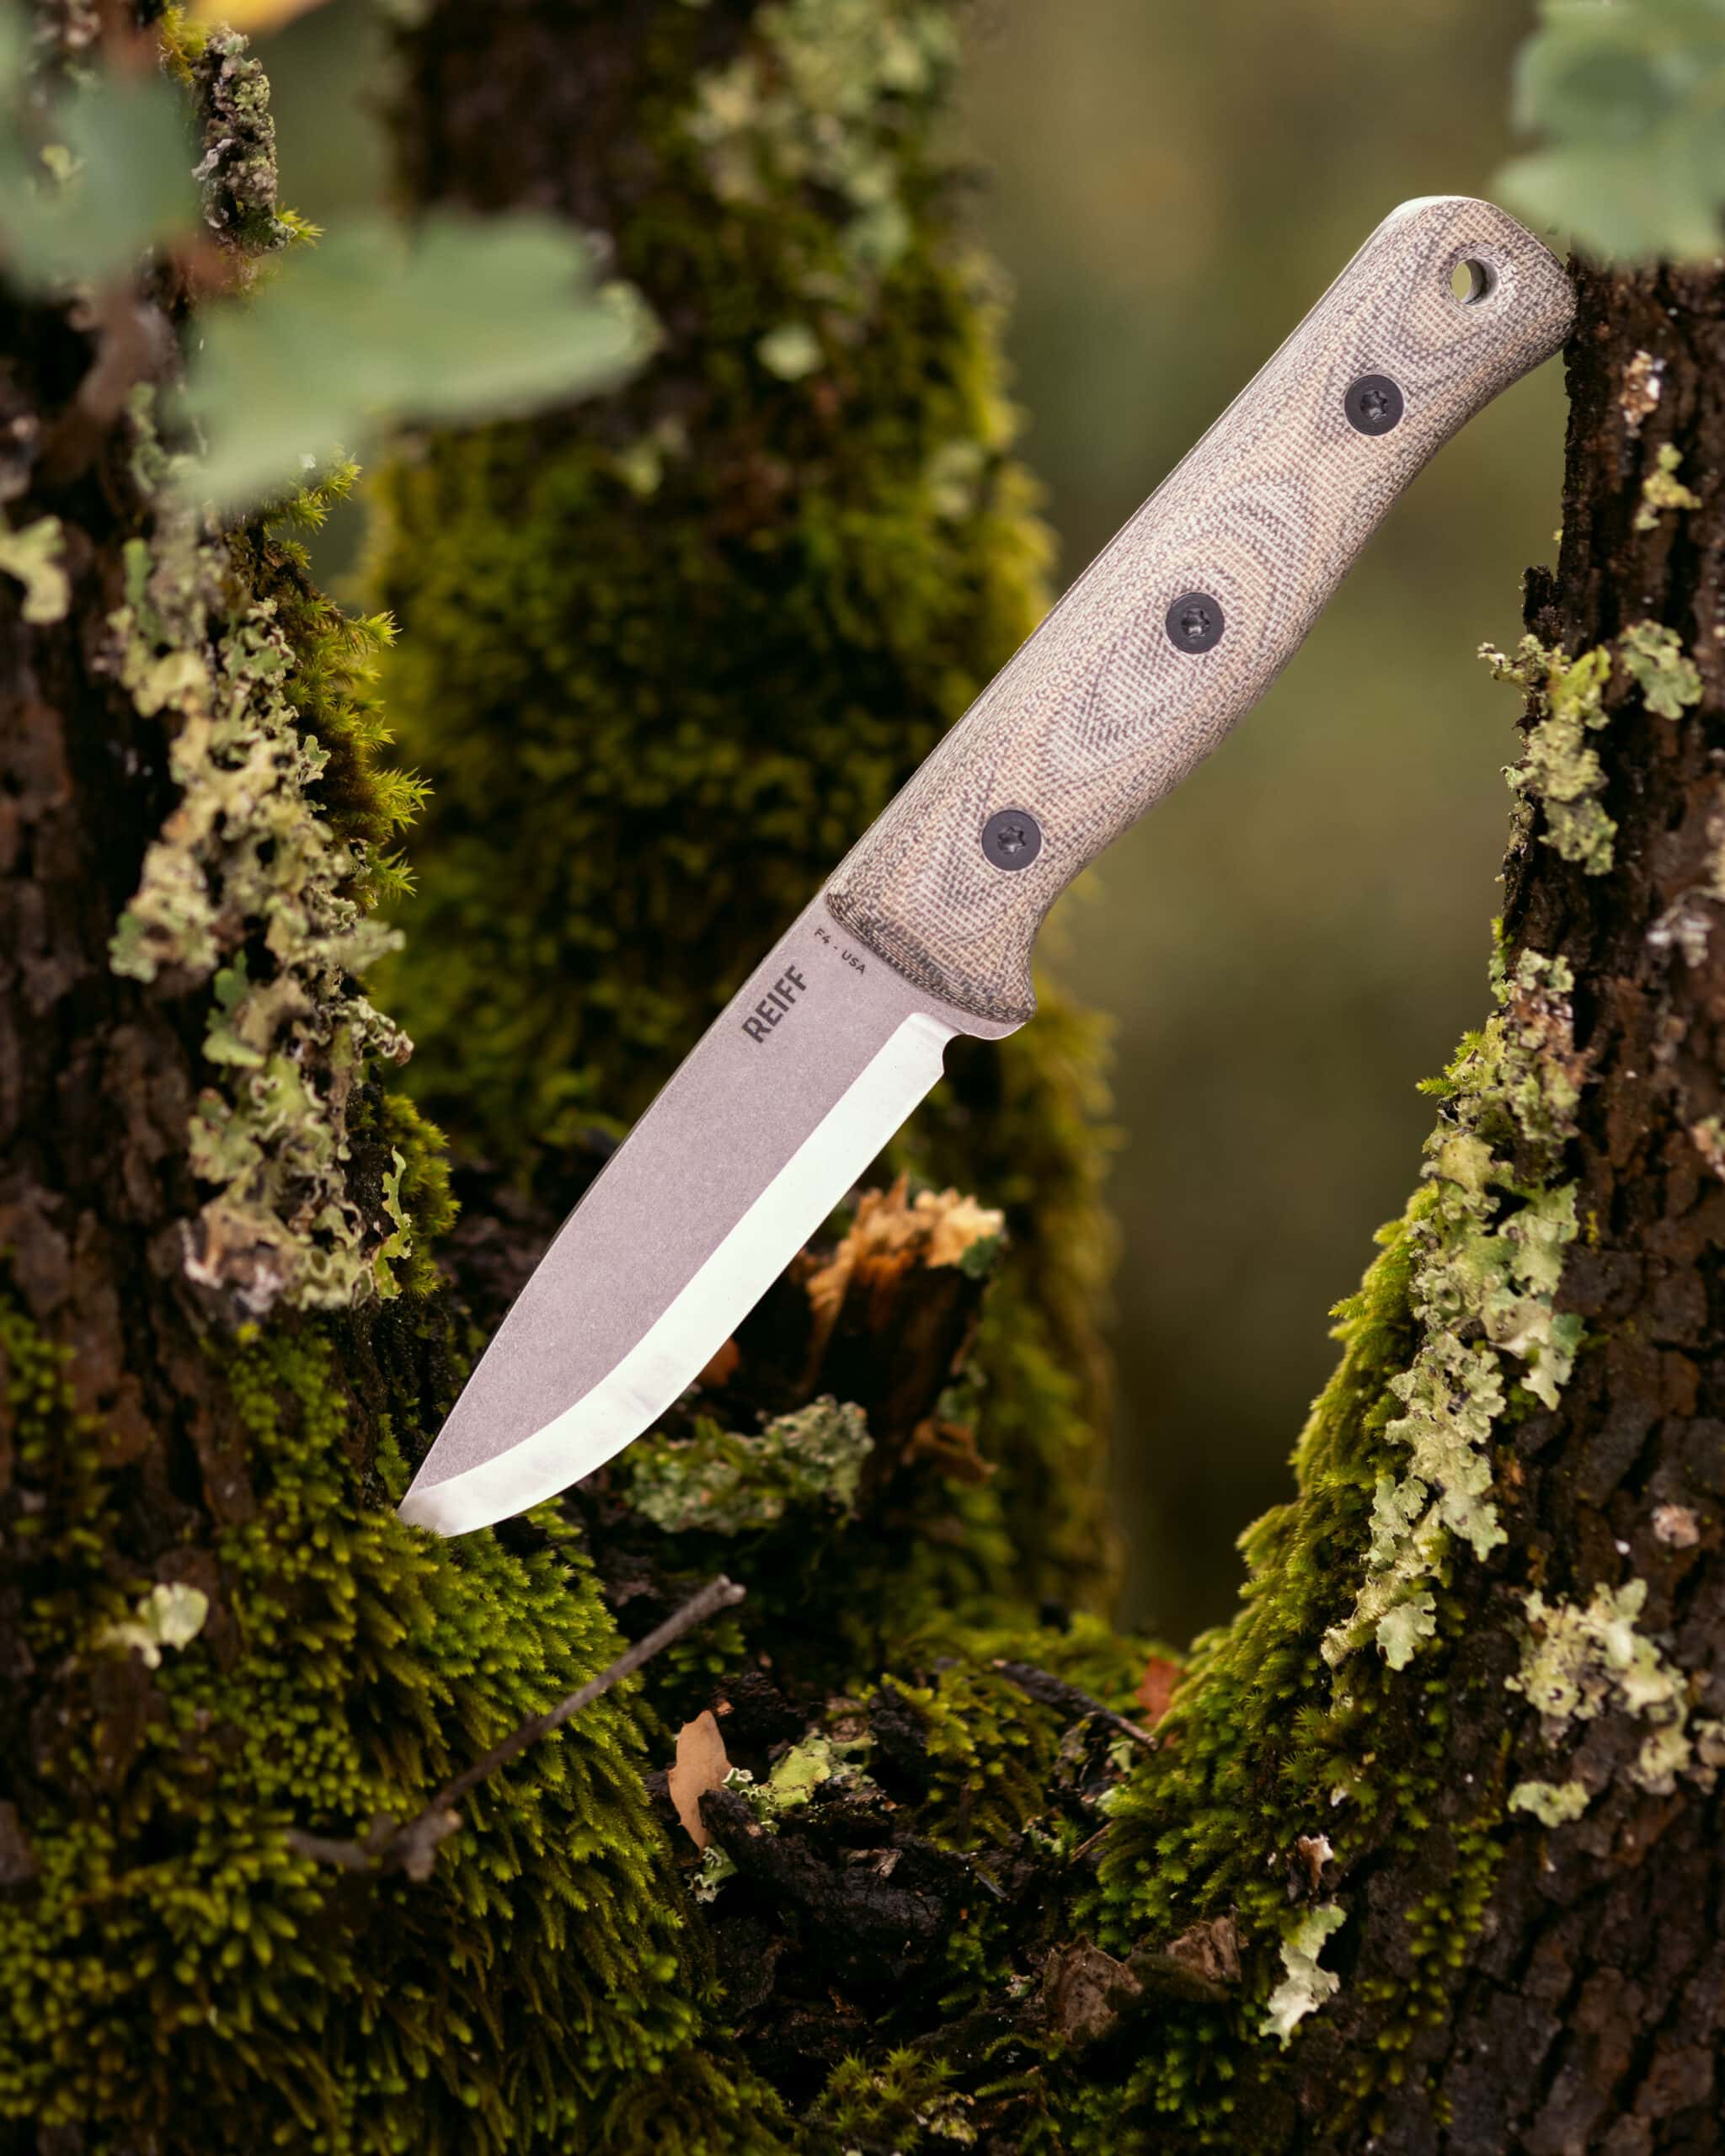 The Reiff F4 Scandi won the award for the best knife update. 